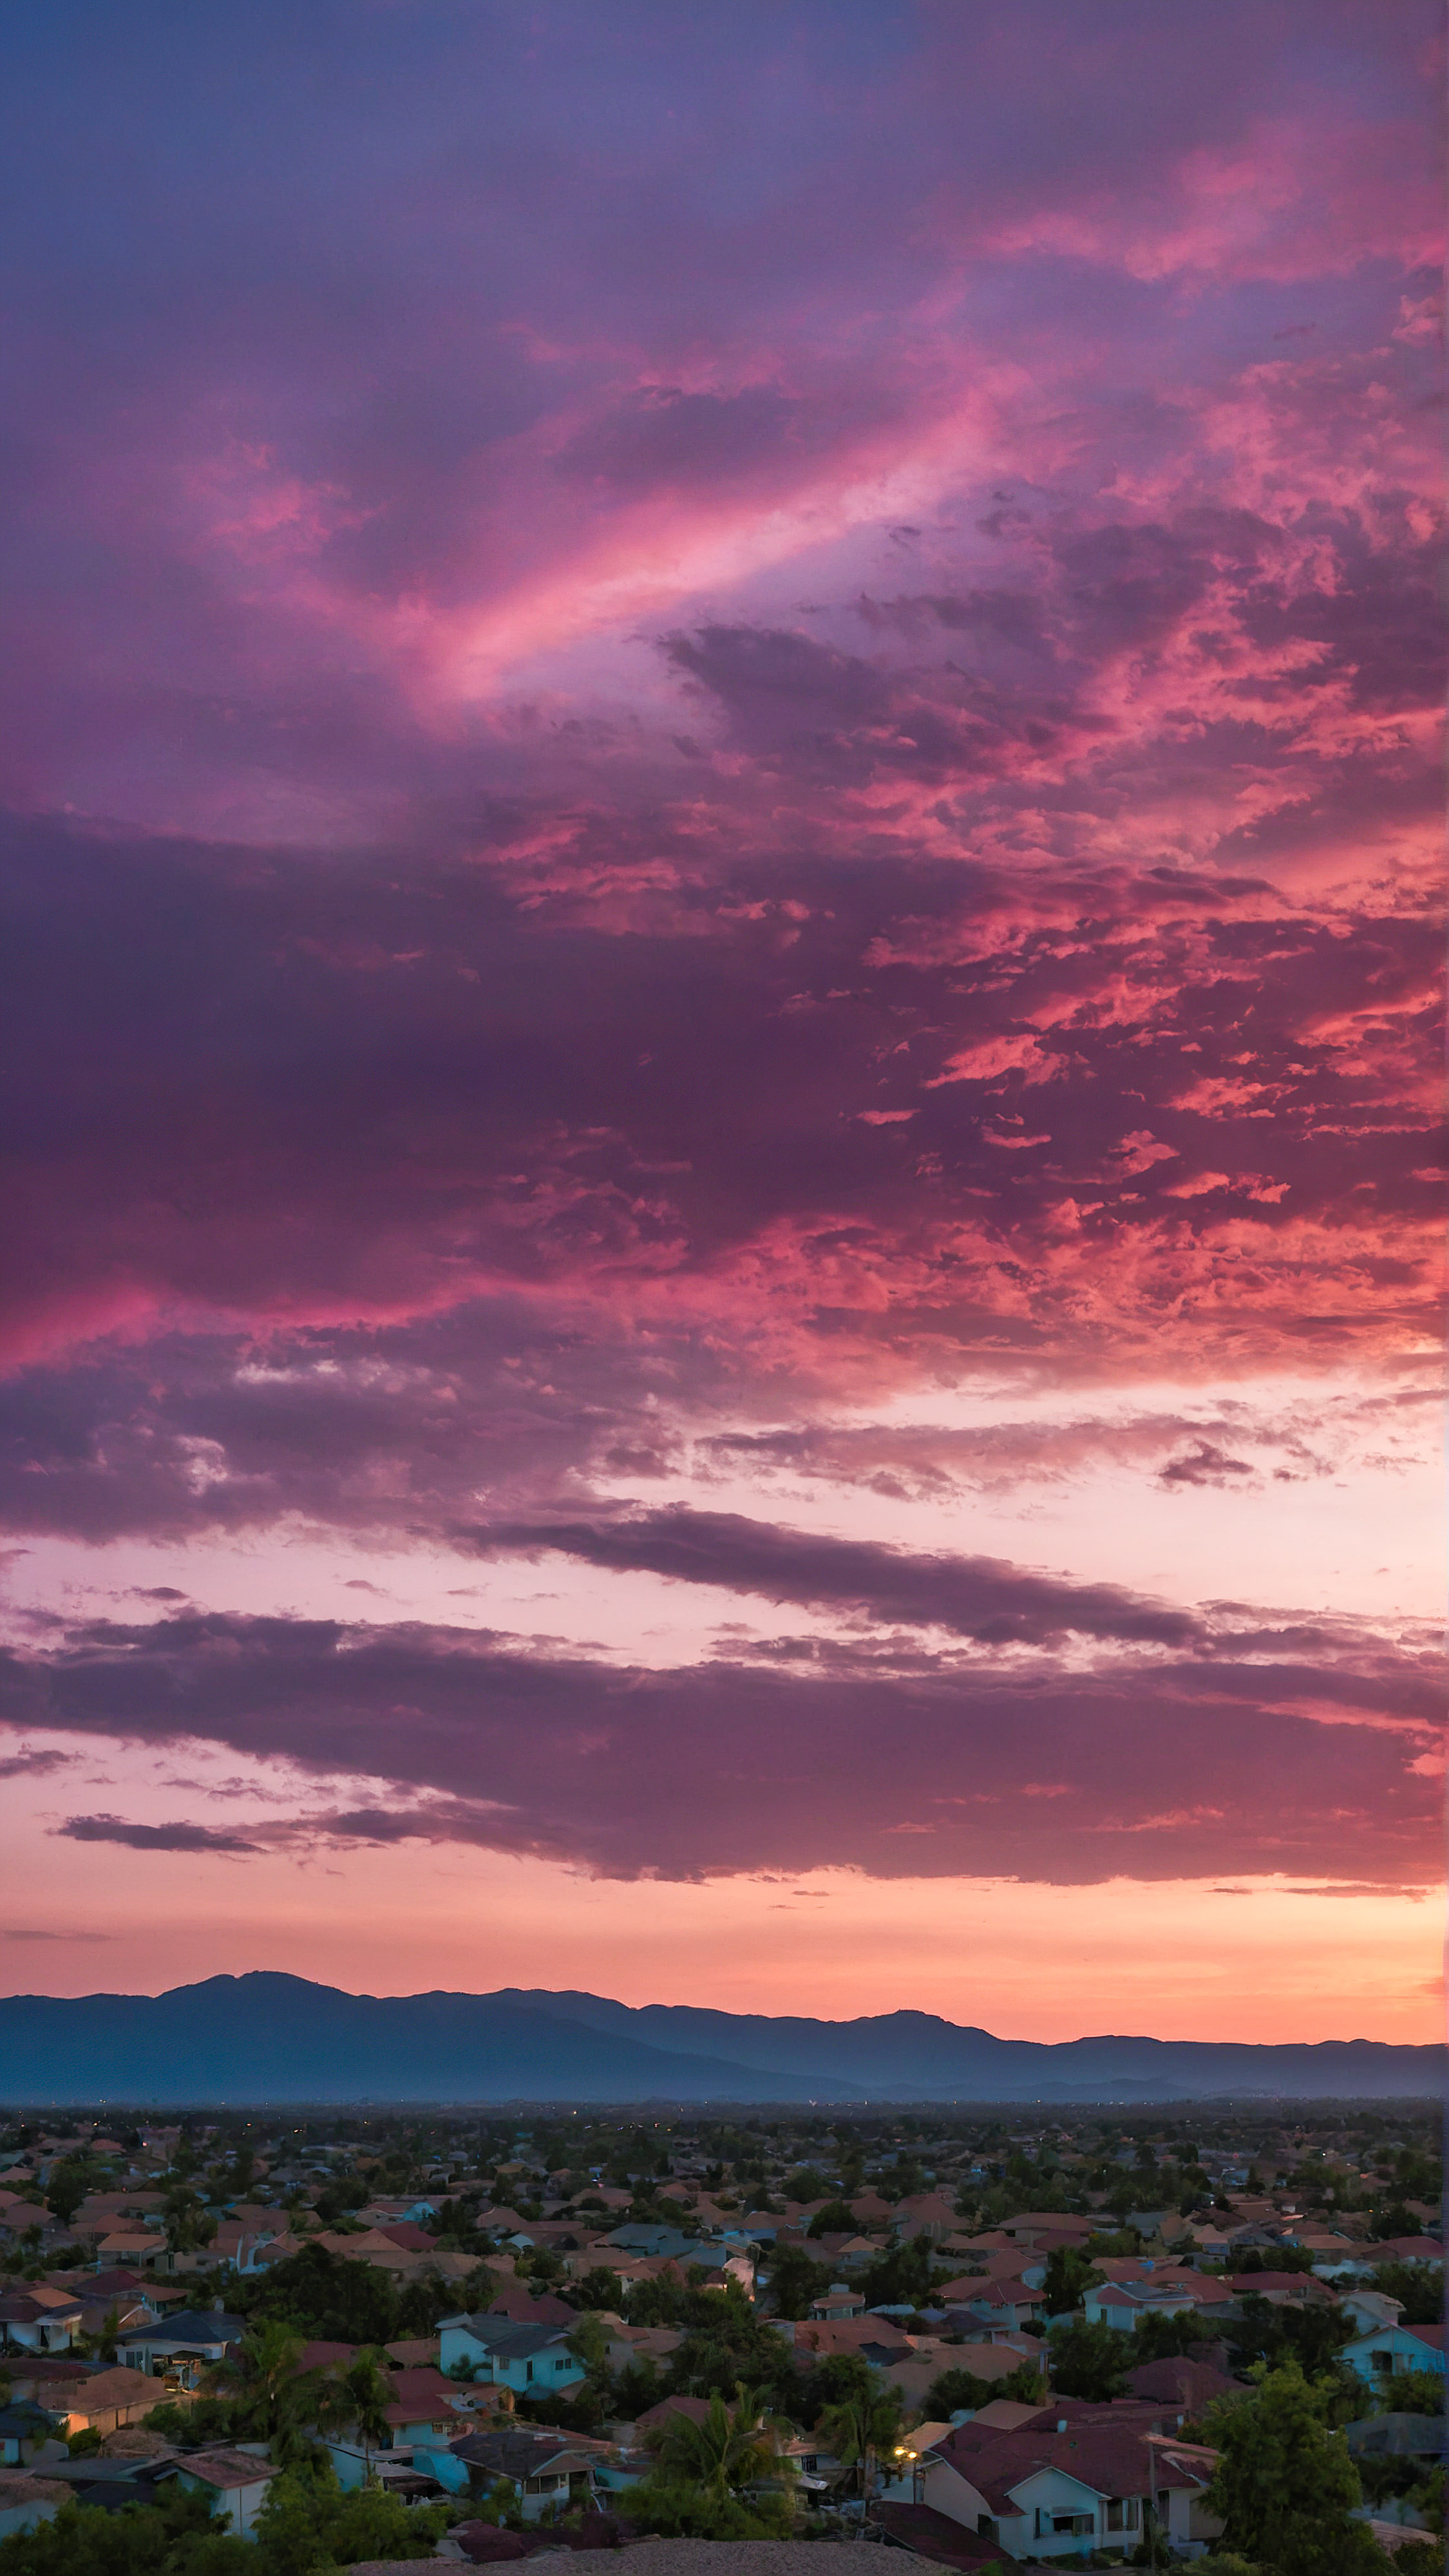 Experience the tranquility of a serene and colorful evening sky transitioning from deep purple to warm pink over the silhouette of a quiet town with our cute aesthetic backgrounds for iPhone.